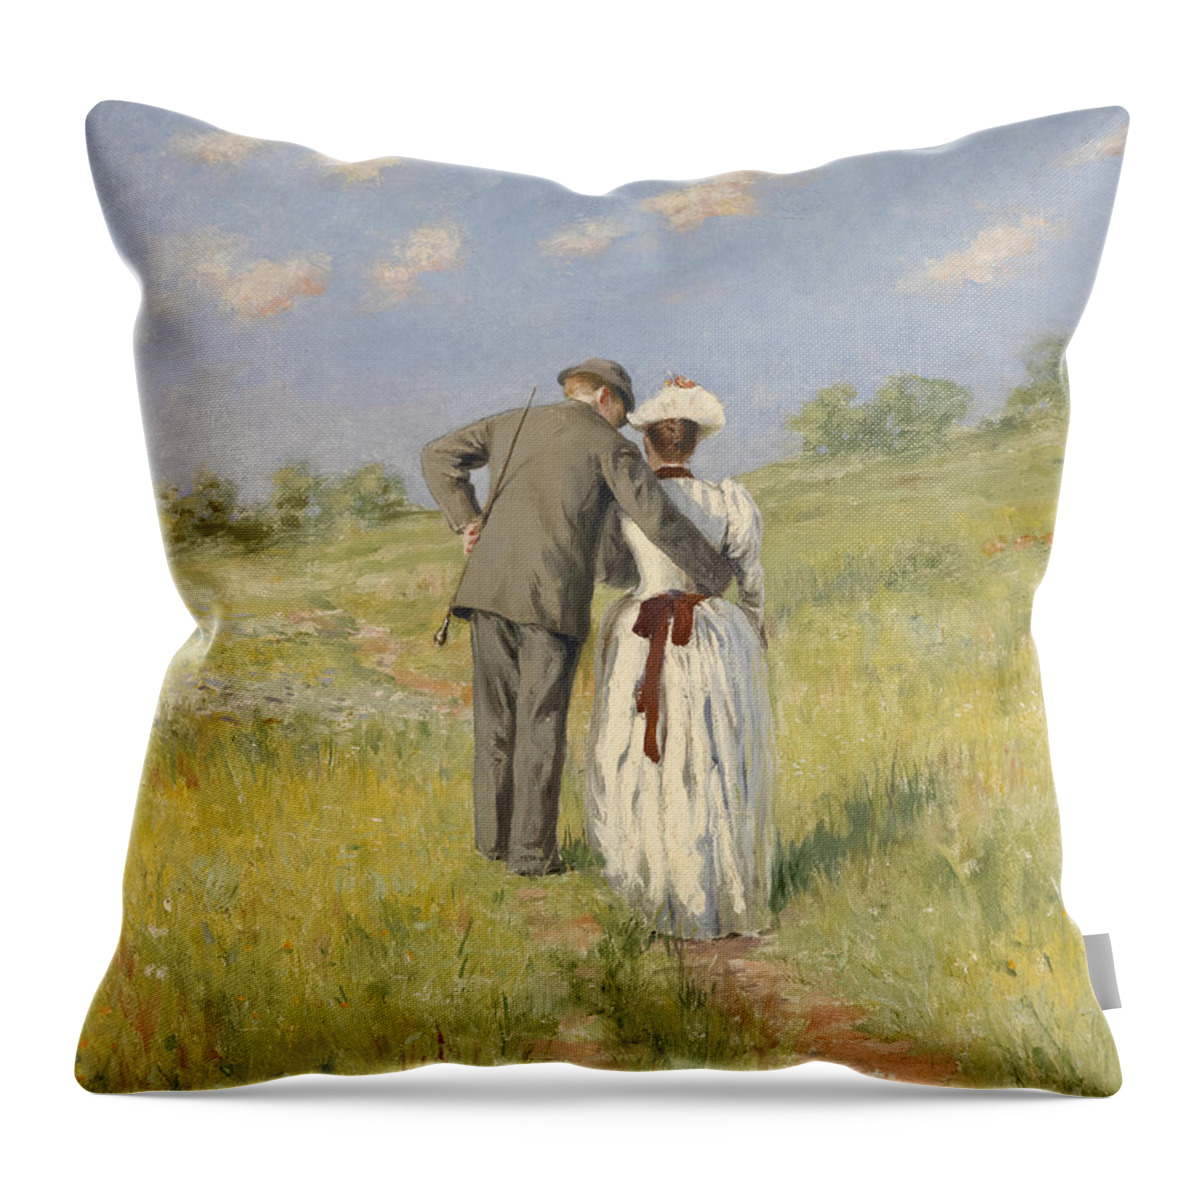 American Throw Pillow featuring the painting Portrait of Captain William Holmes and Mary Shafter McKitterick by American School